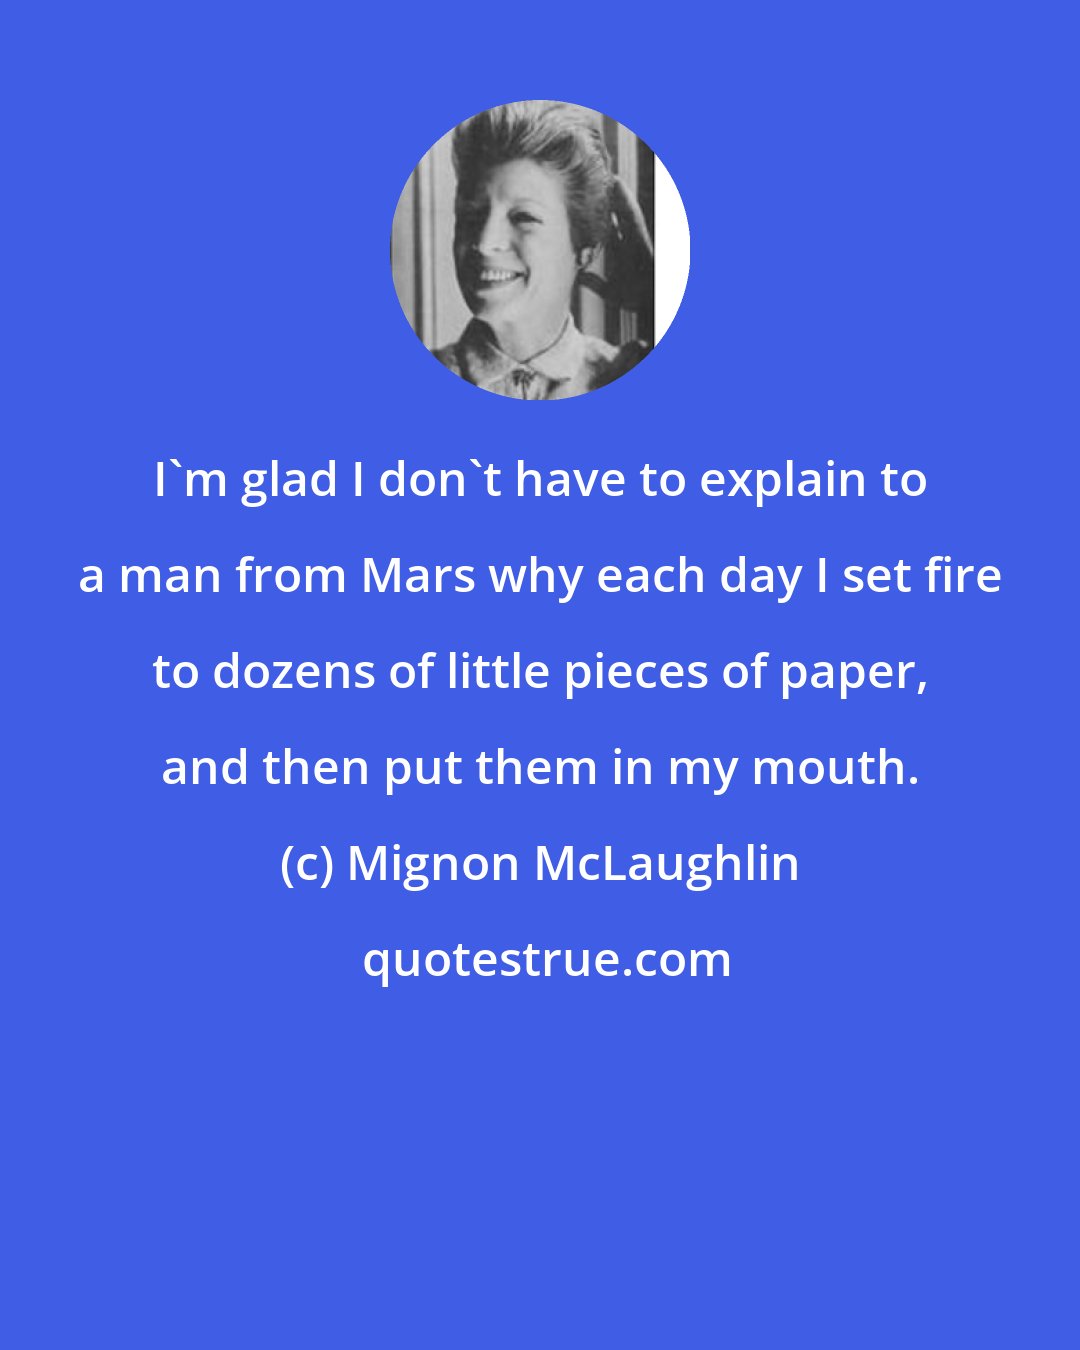 Mignon McLaughlin: I'm glad I don't have to explain to a man from Mars why each day I set fire to dozens of little pieces of paper, and then put them in my mouth.